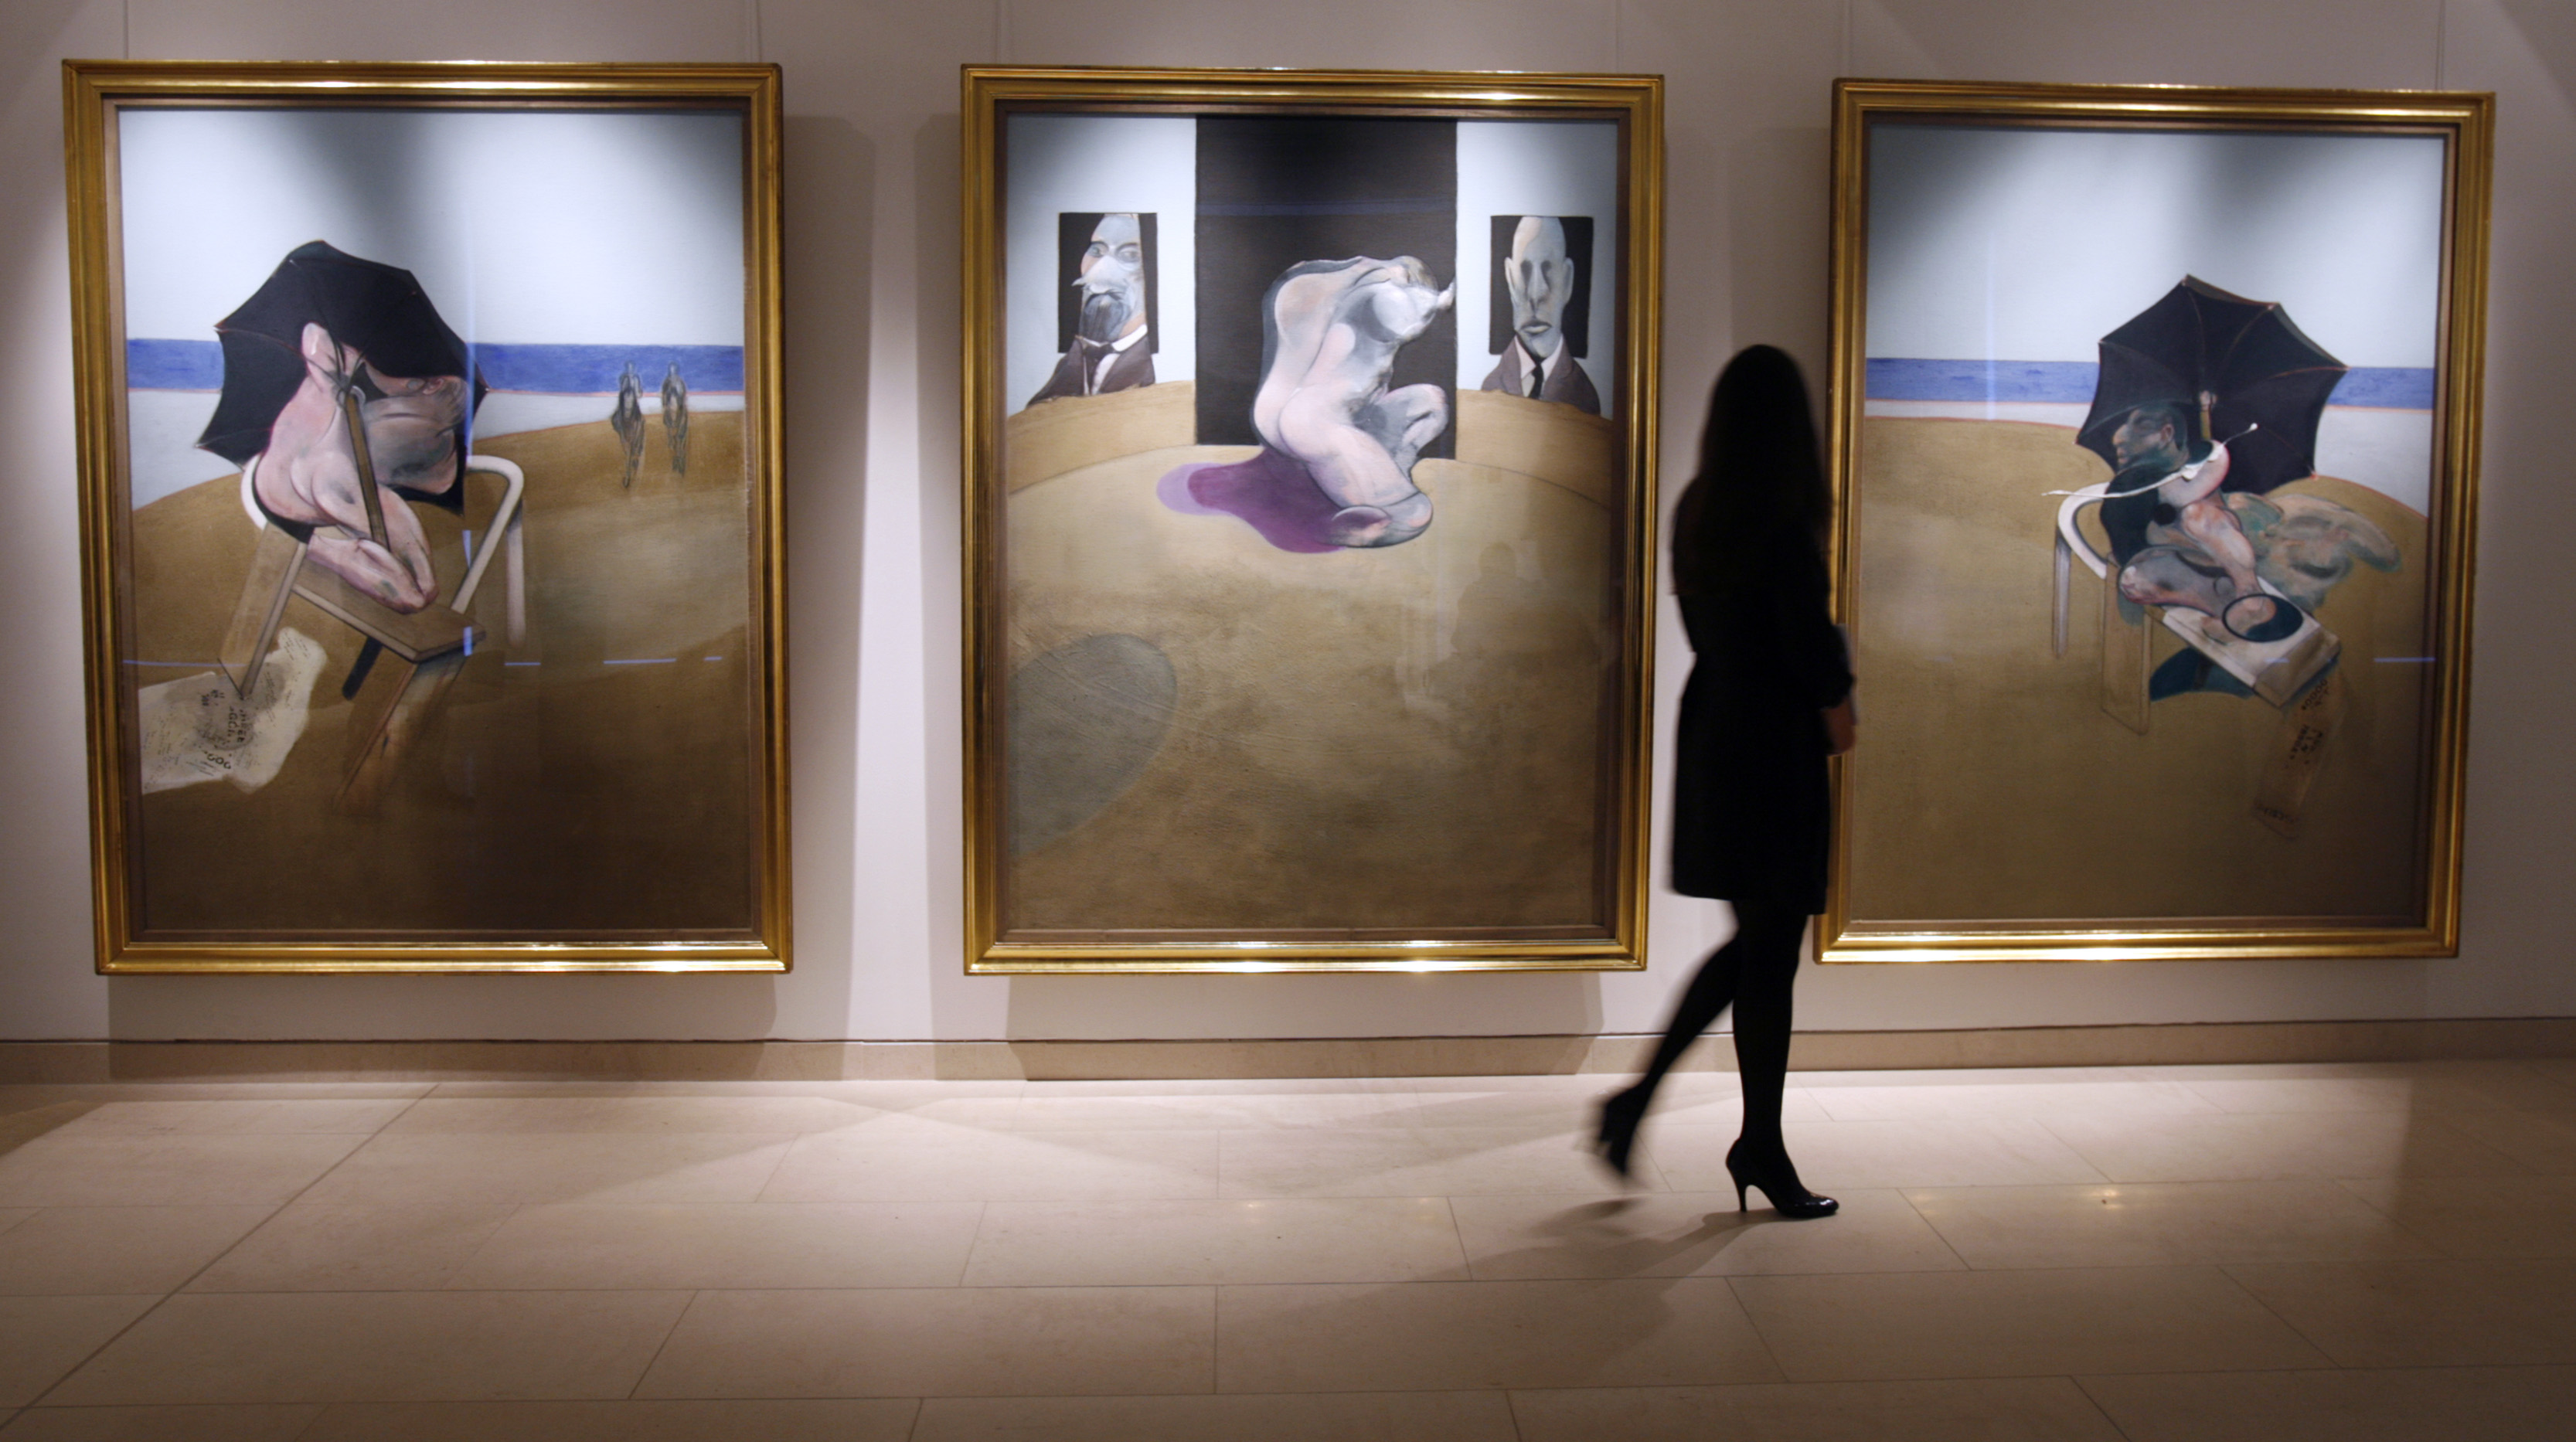 Lewis has Francis Bacon’s Triptych 1974 - 1977 displayed in golden frames on his superyacht